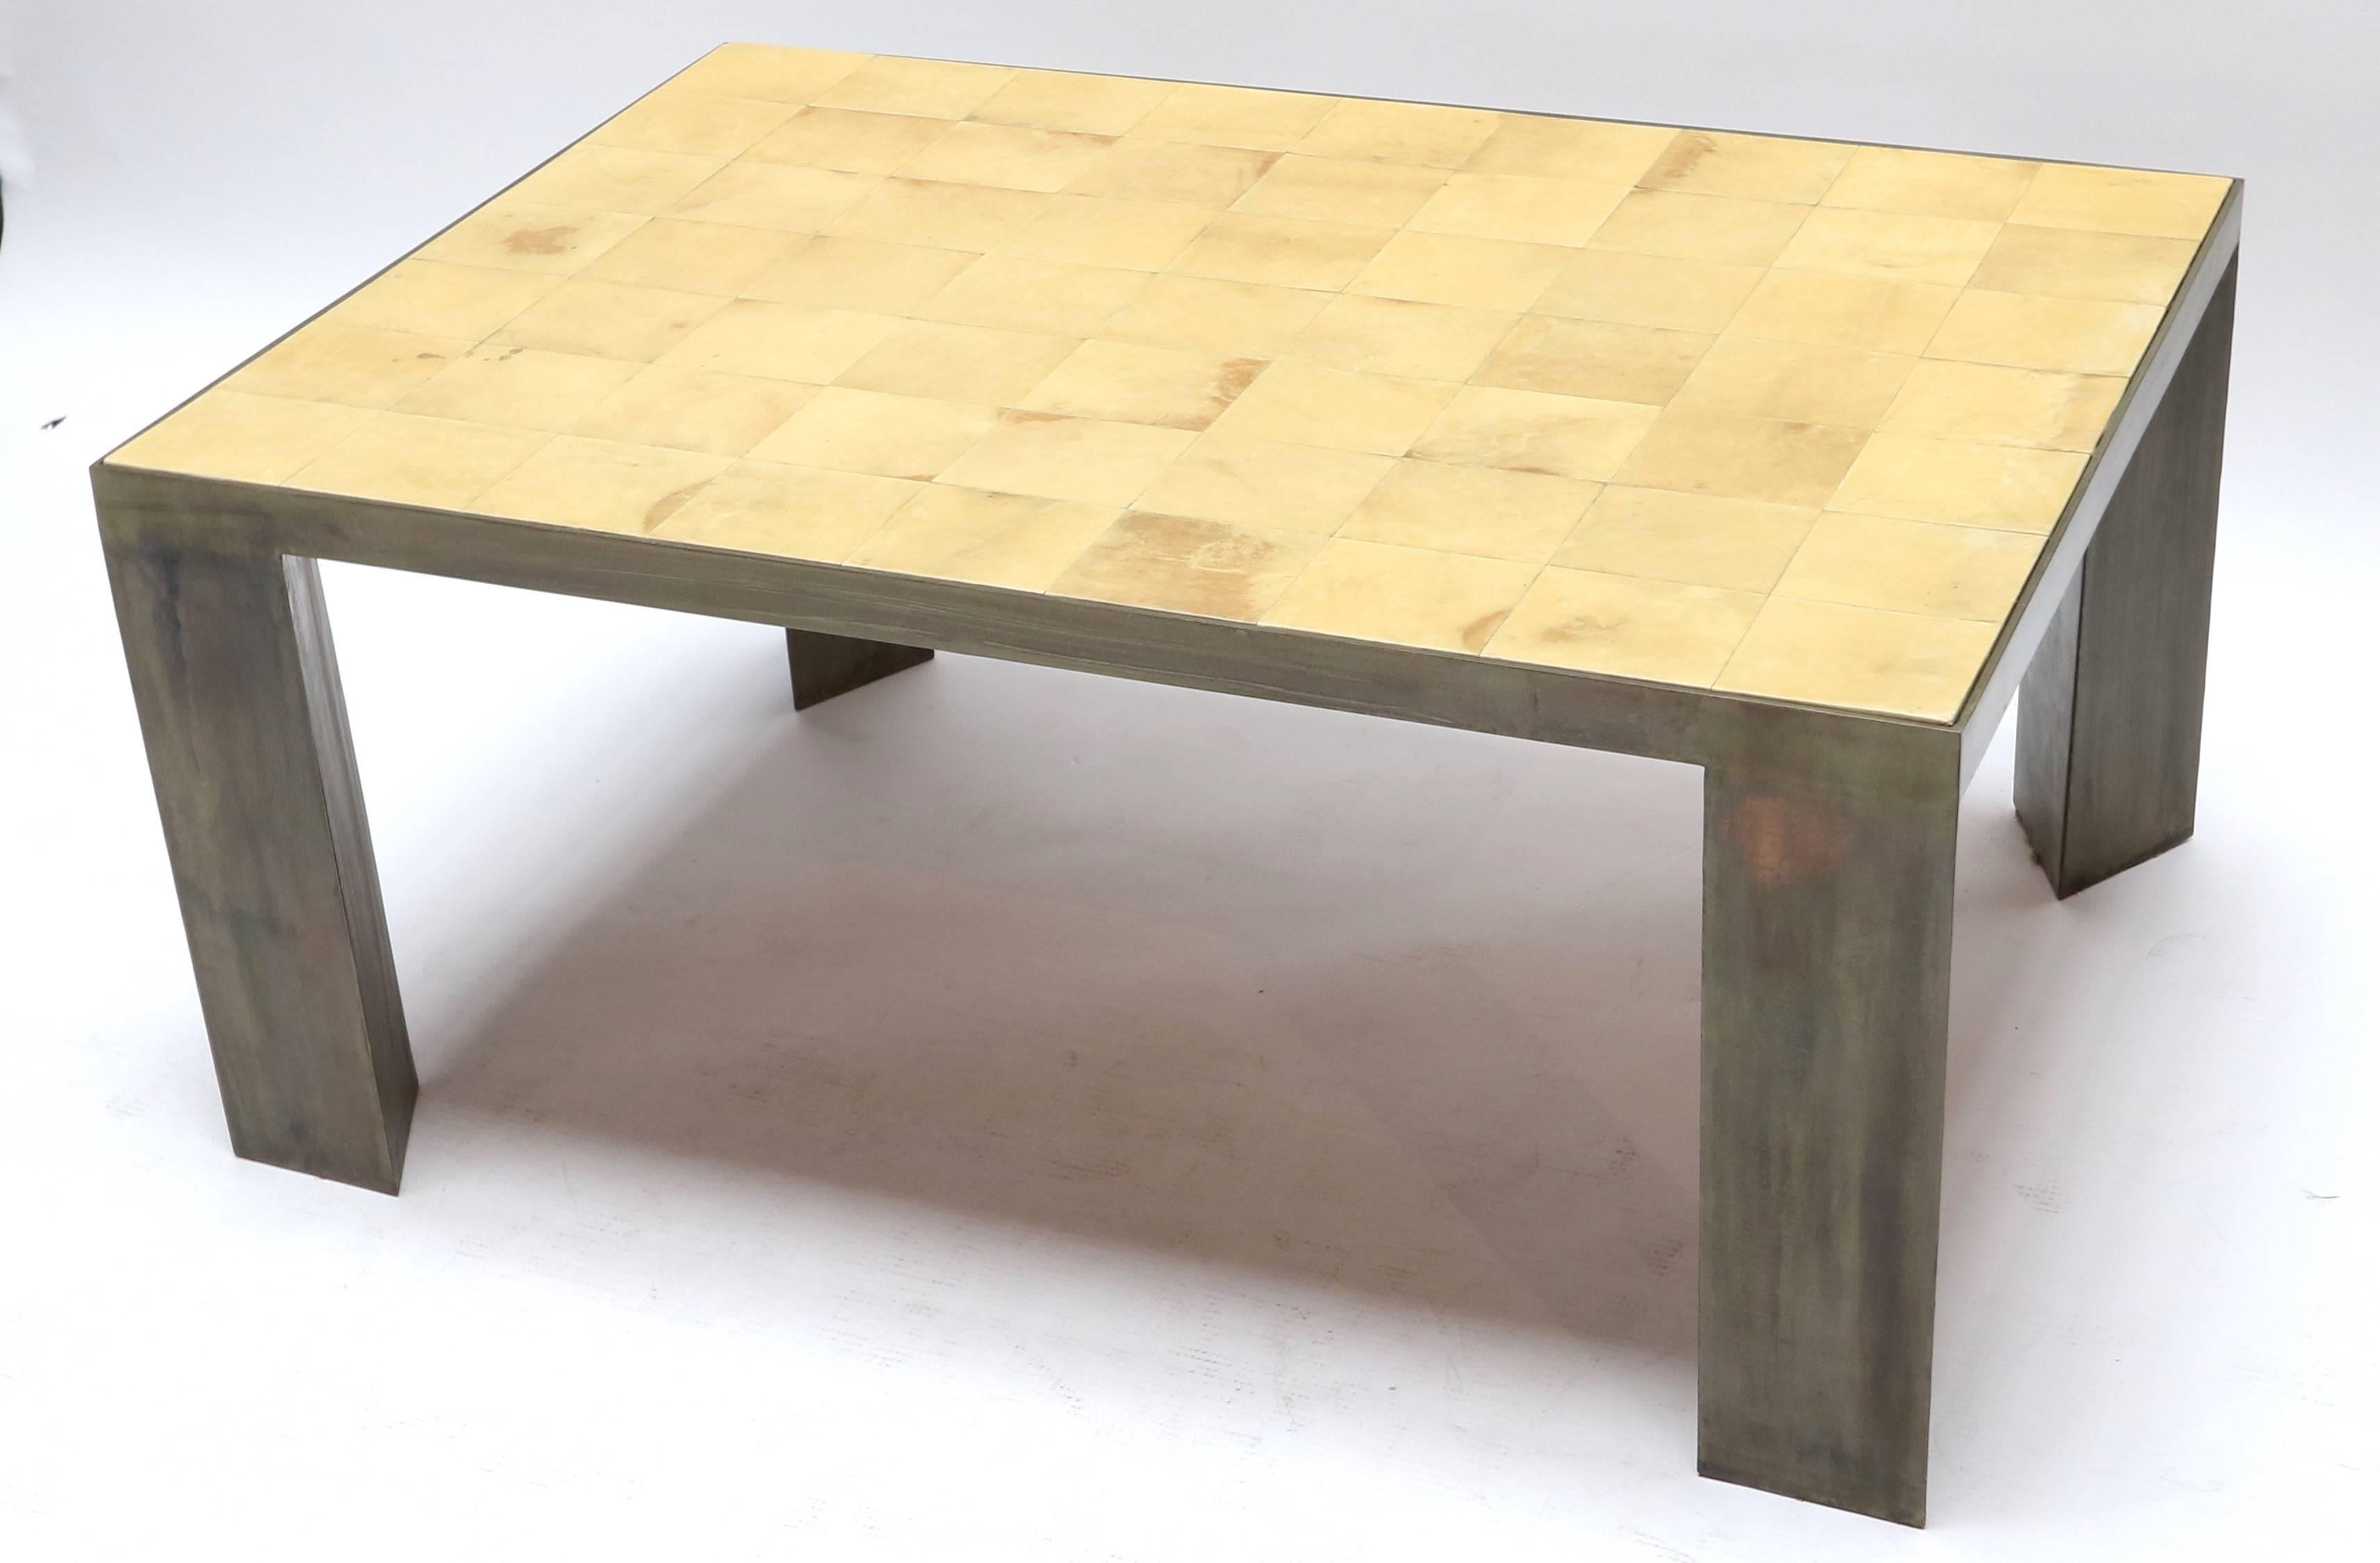 Parchment coffee table with metal legs.